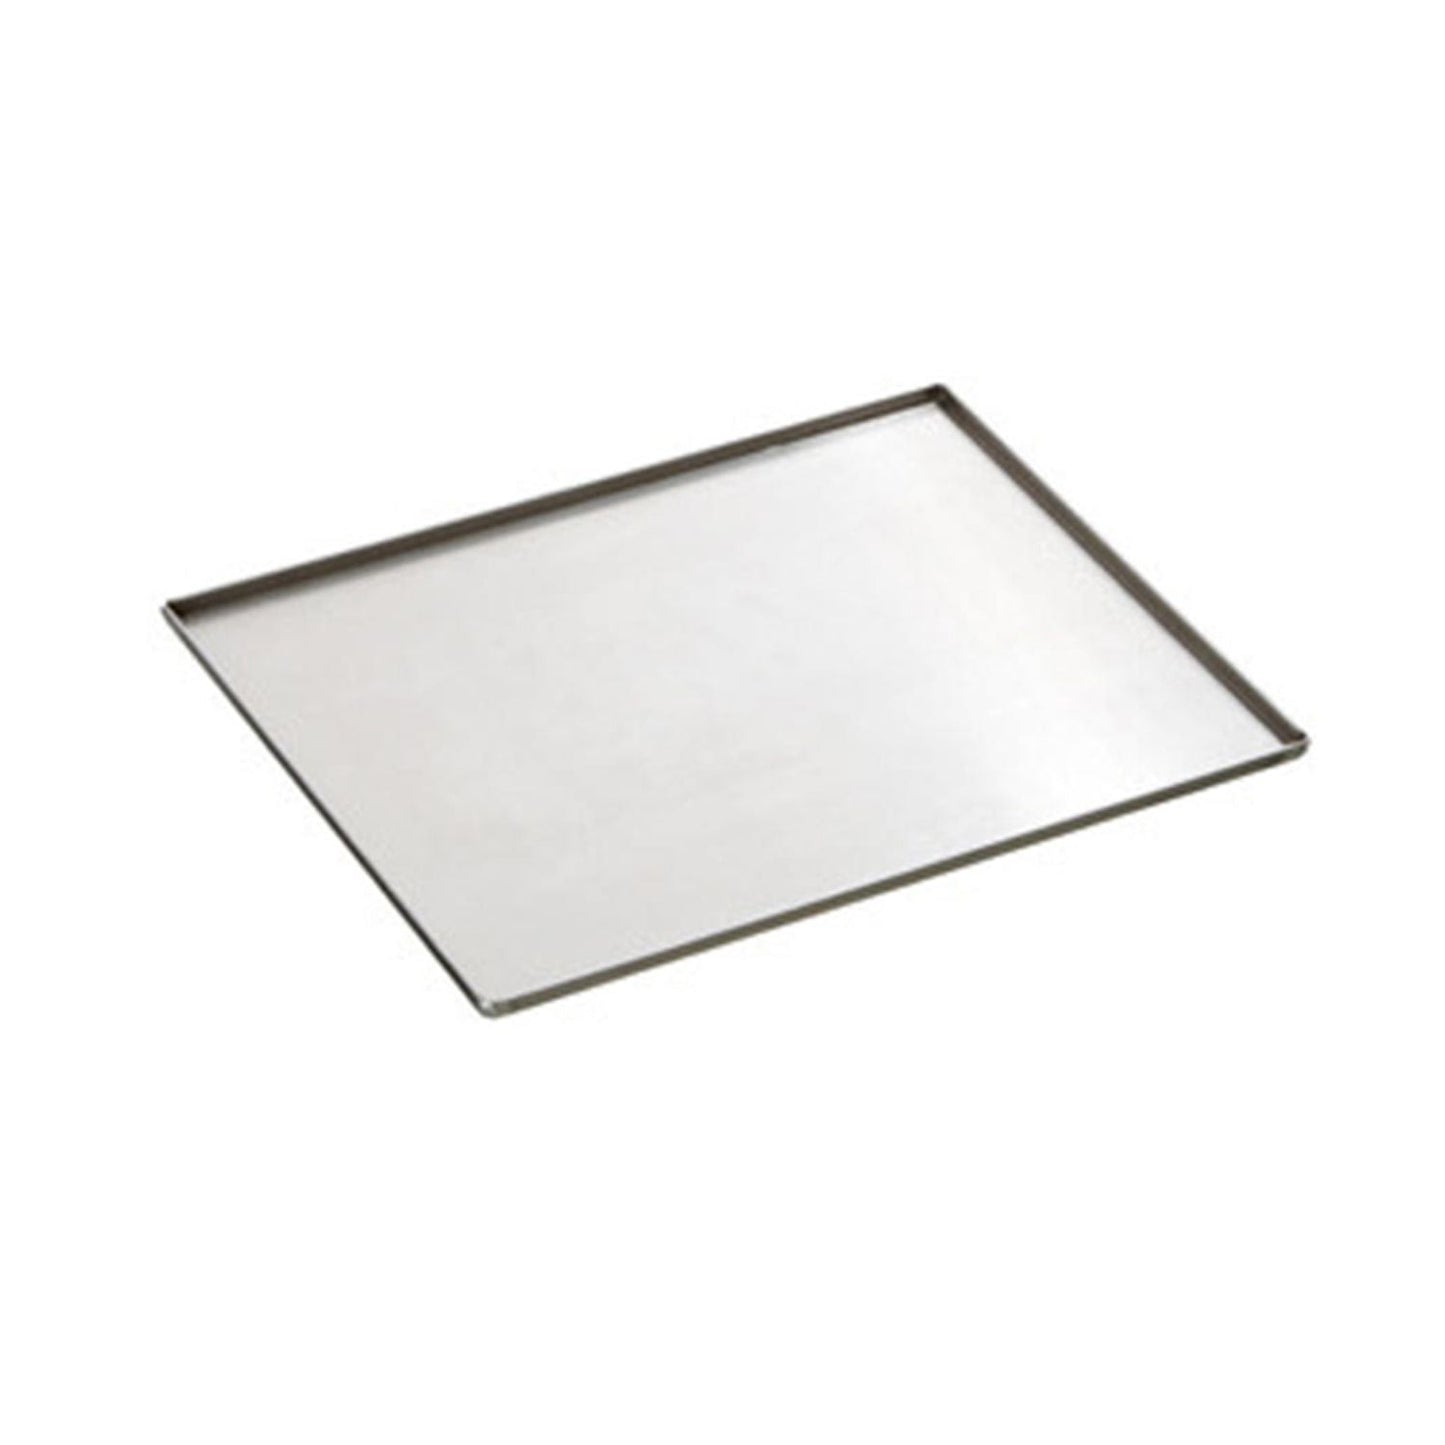 1 mm Stainless Steel Baking Tray - 750 x 450 x 25 mm - Large